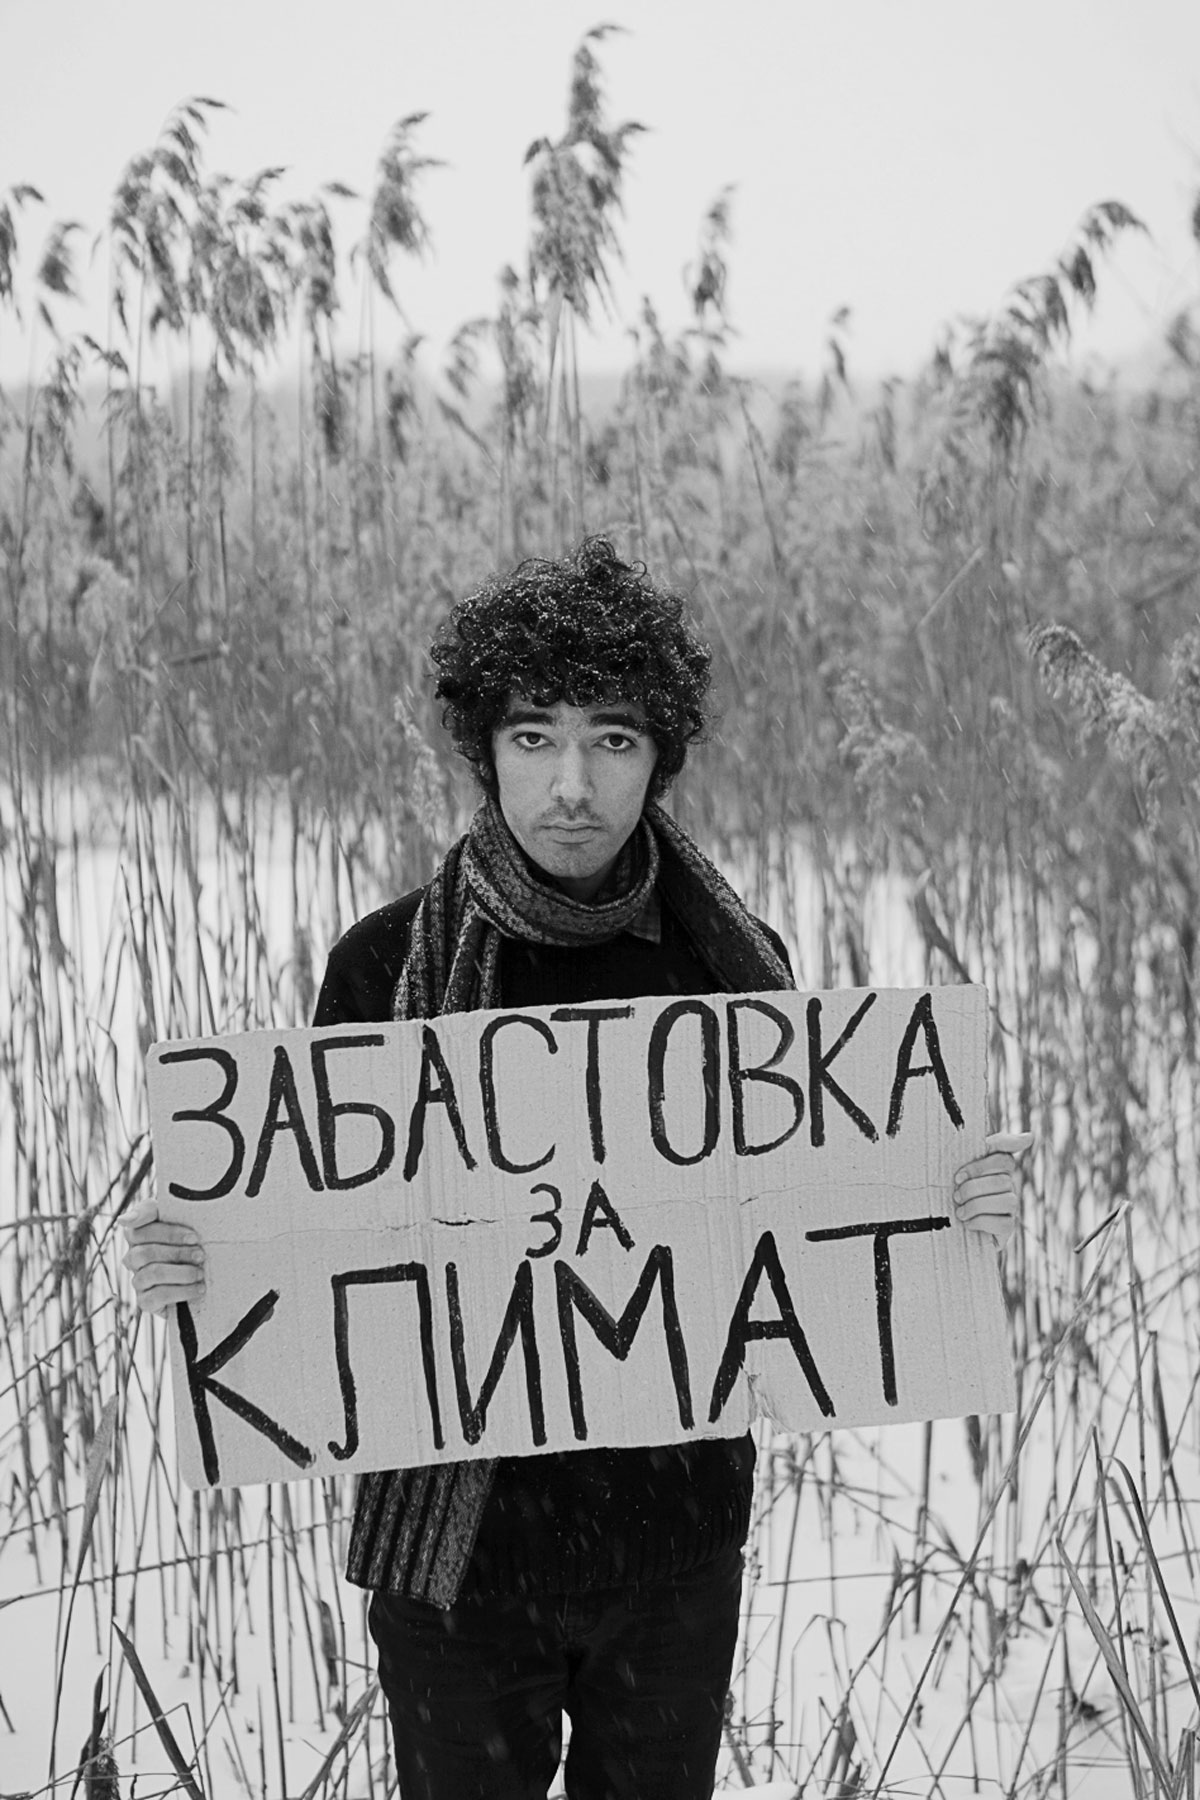 <p>Arshak Makichyan is a climate change activist and a coordinator of Fridays For Future Russia, the climate strike group inspired by Greta Thunberg, who tirelessly works to raise awareness about the issue in Russia. This portrait was taken by Tatiana Ermilova for I Do What I Want, a collaborative project of the label Kultrab and students of the Rodchenko School of Photography in the Media department, aiming to spotlight activists and cultural figures promoting freedom and self-expression.</p>